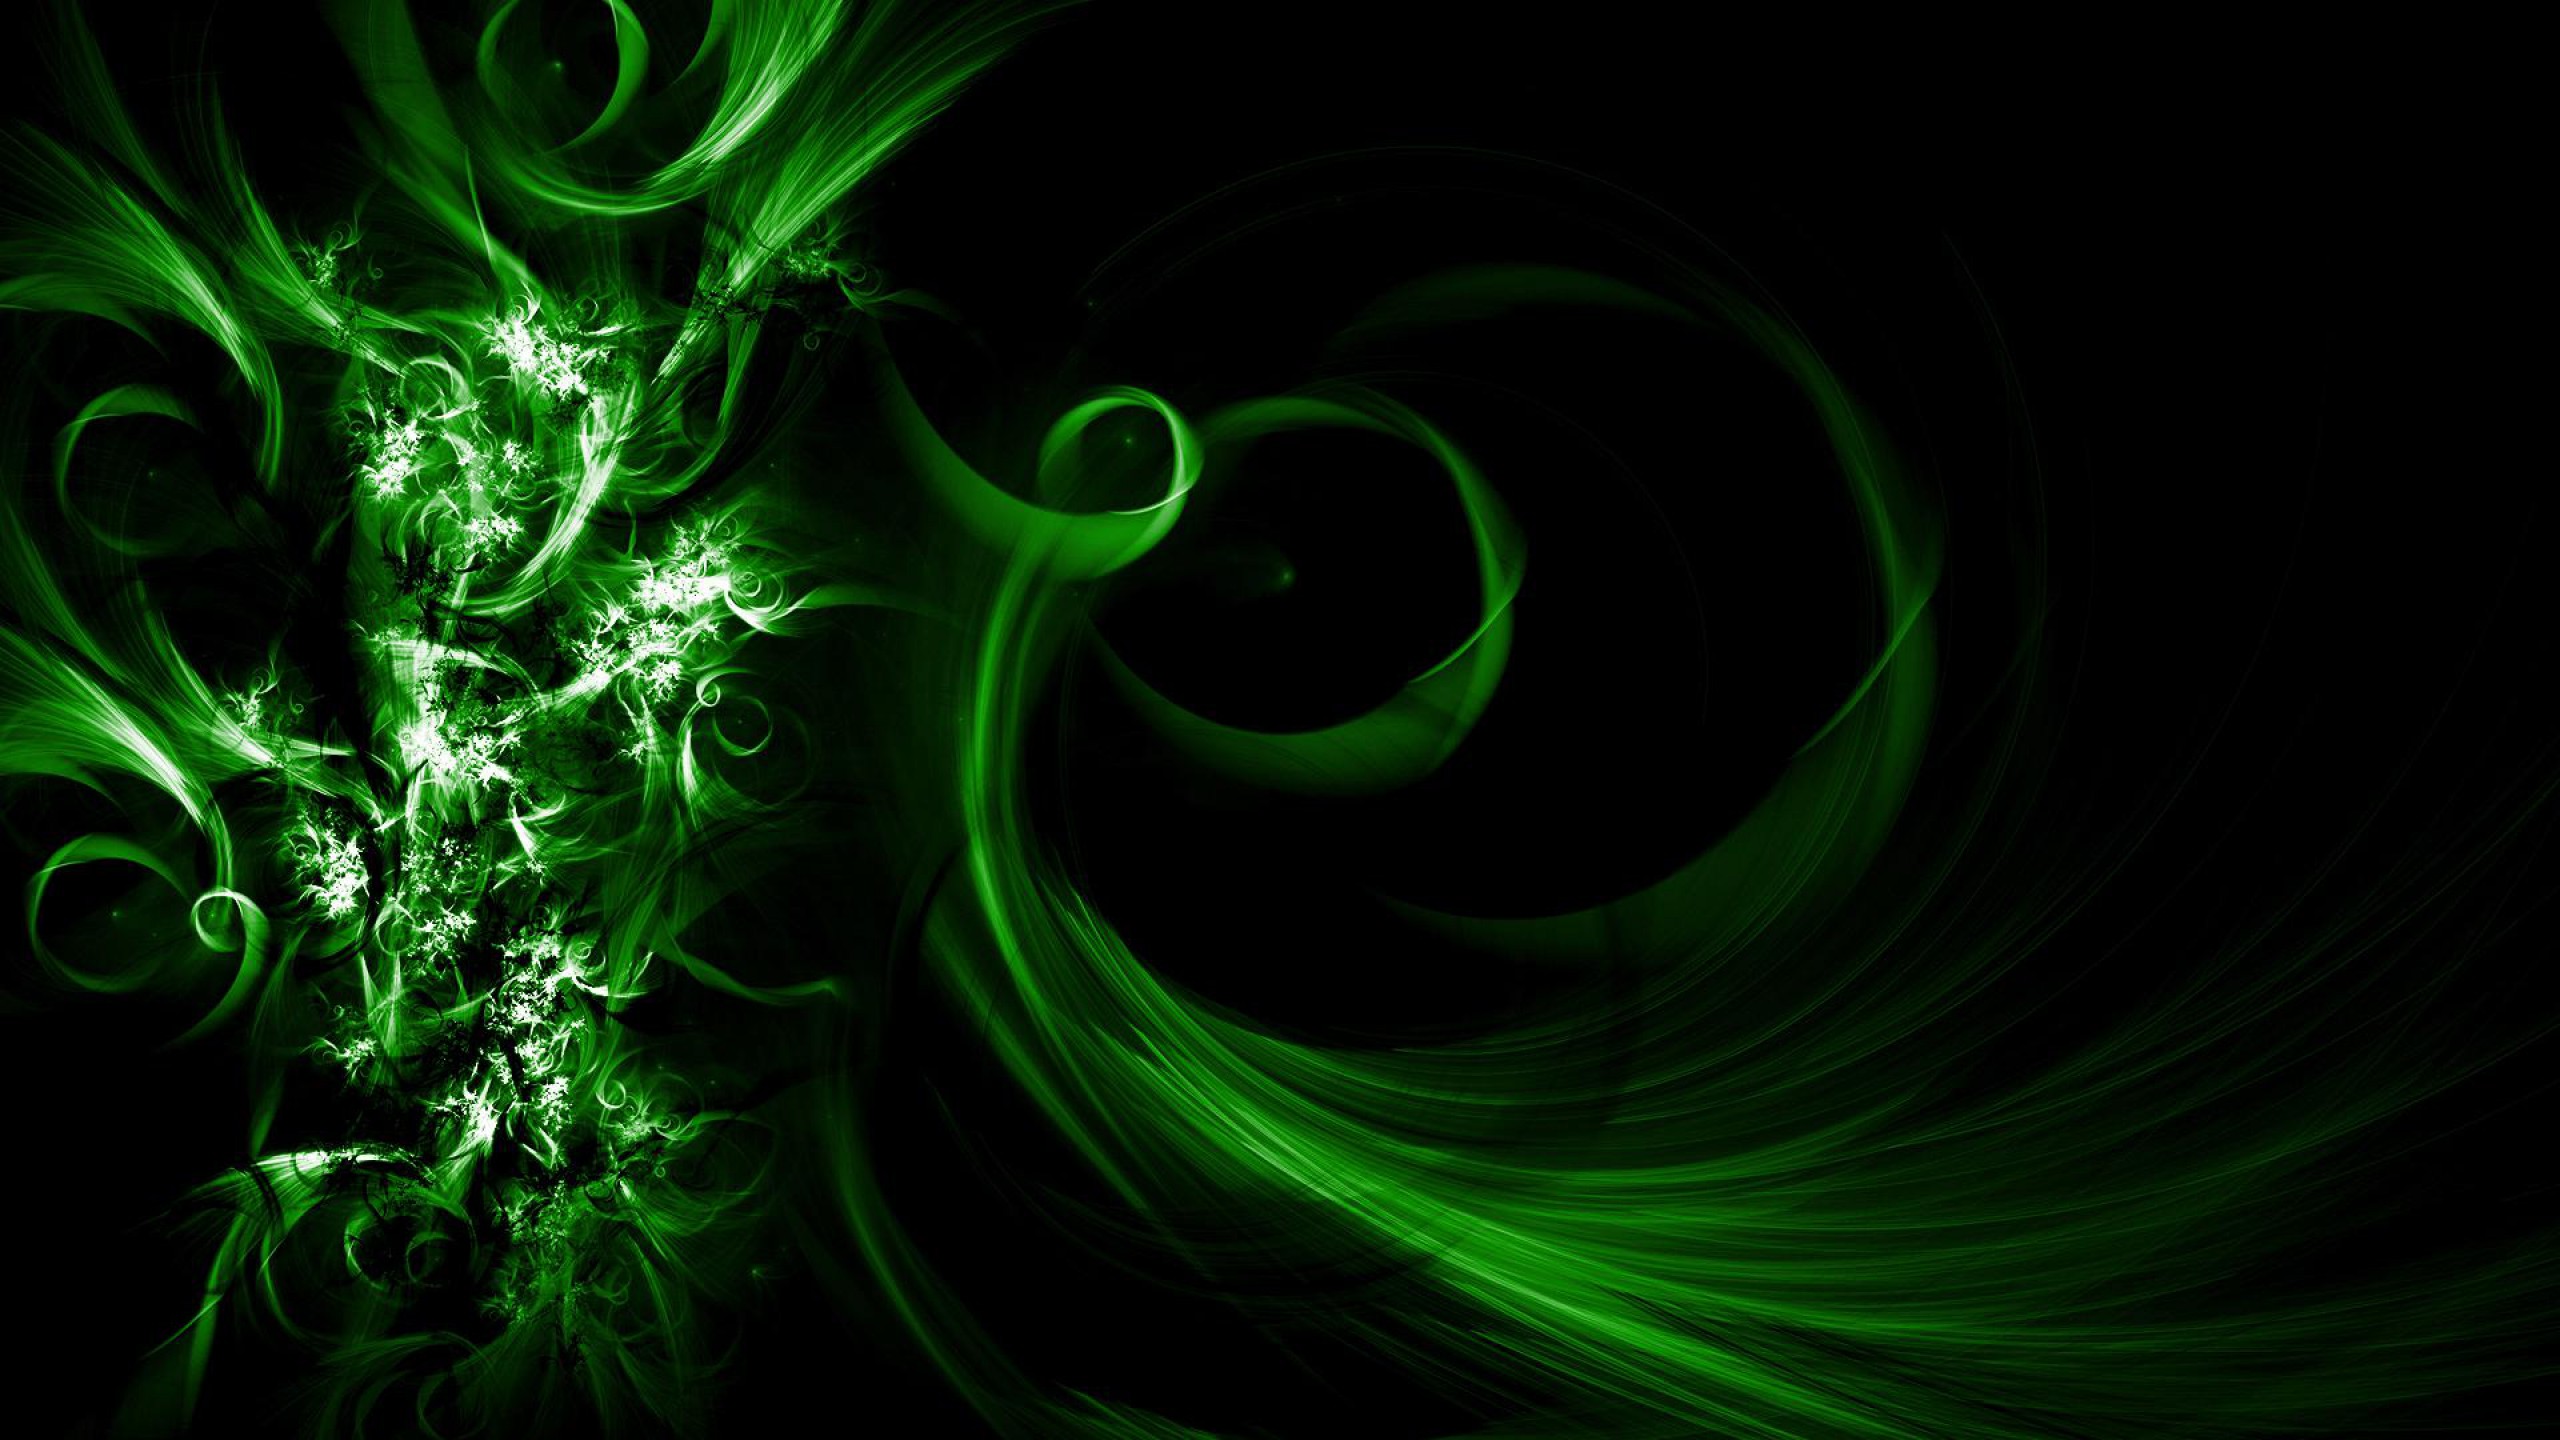 Abstract Cool Wallpaper 2560x1440 44649